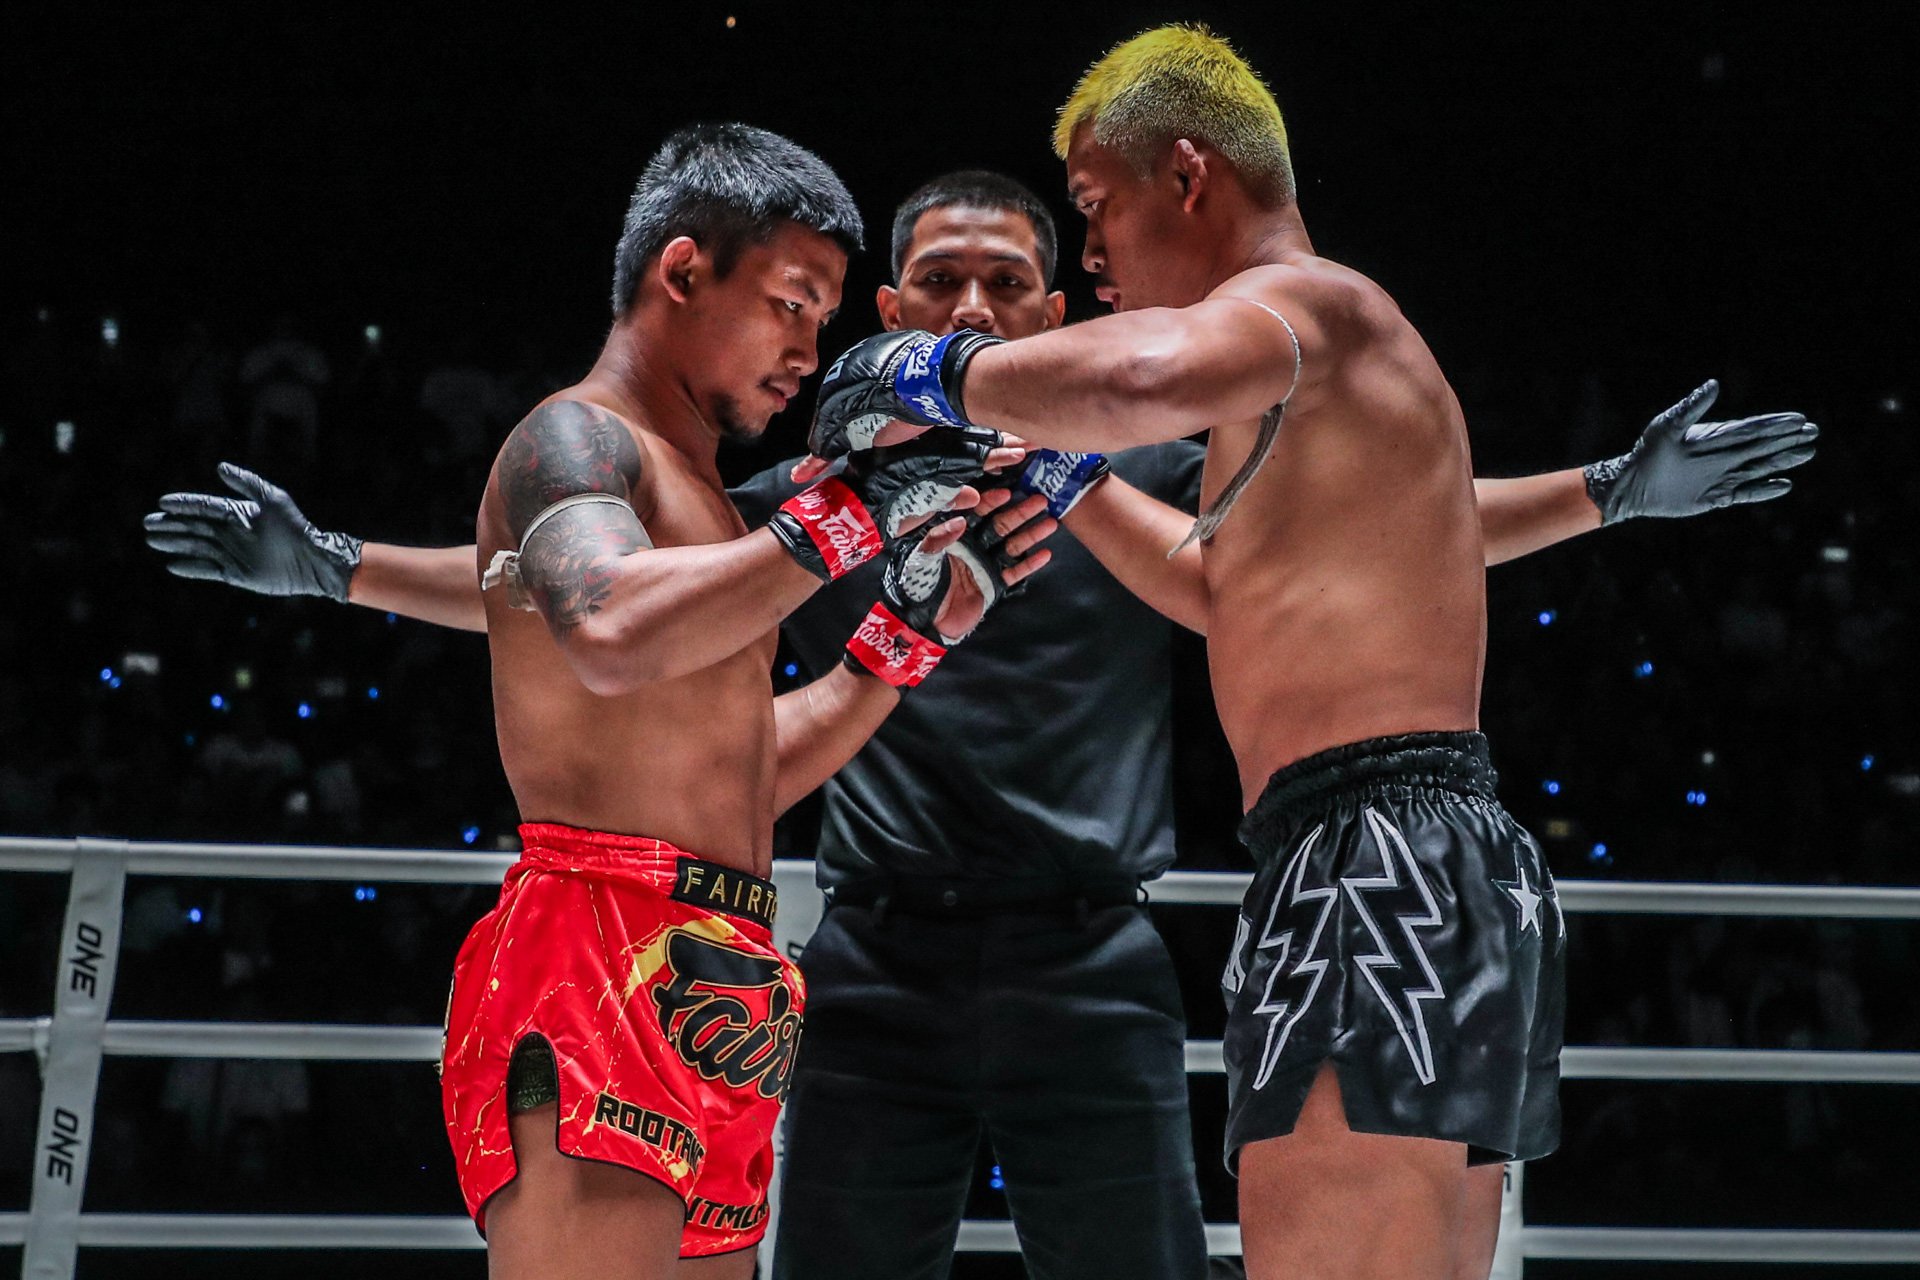 Rodtang and Superlek show respect before the fight starts. Photo: ONE Championship